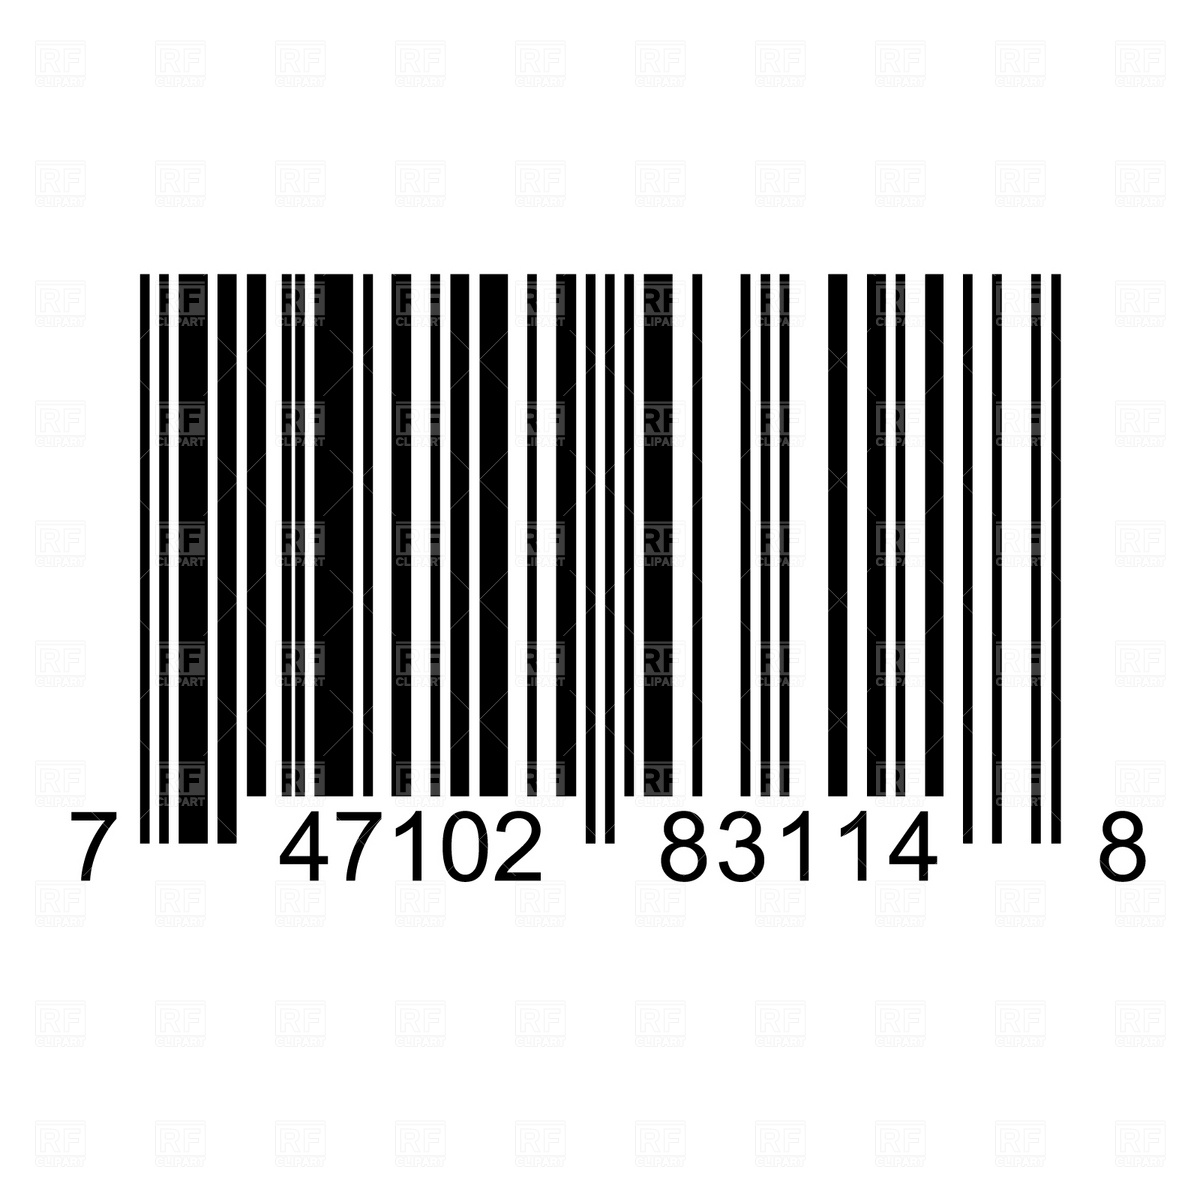 barcode computers clipart